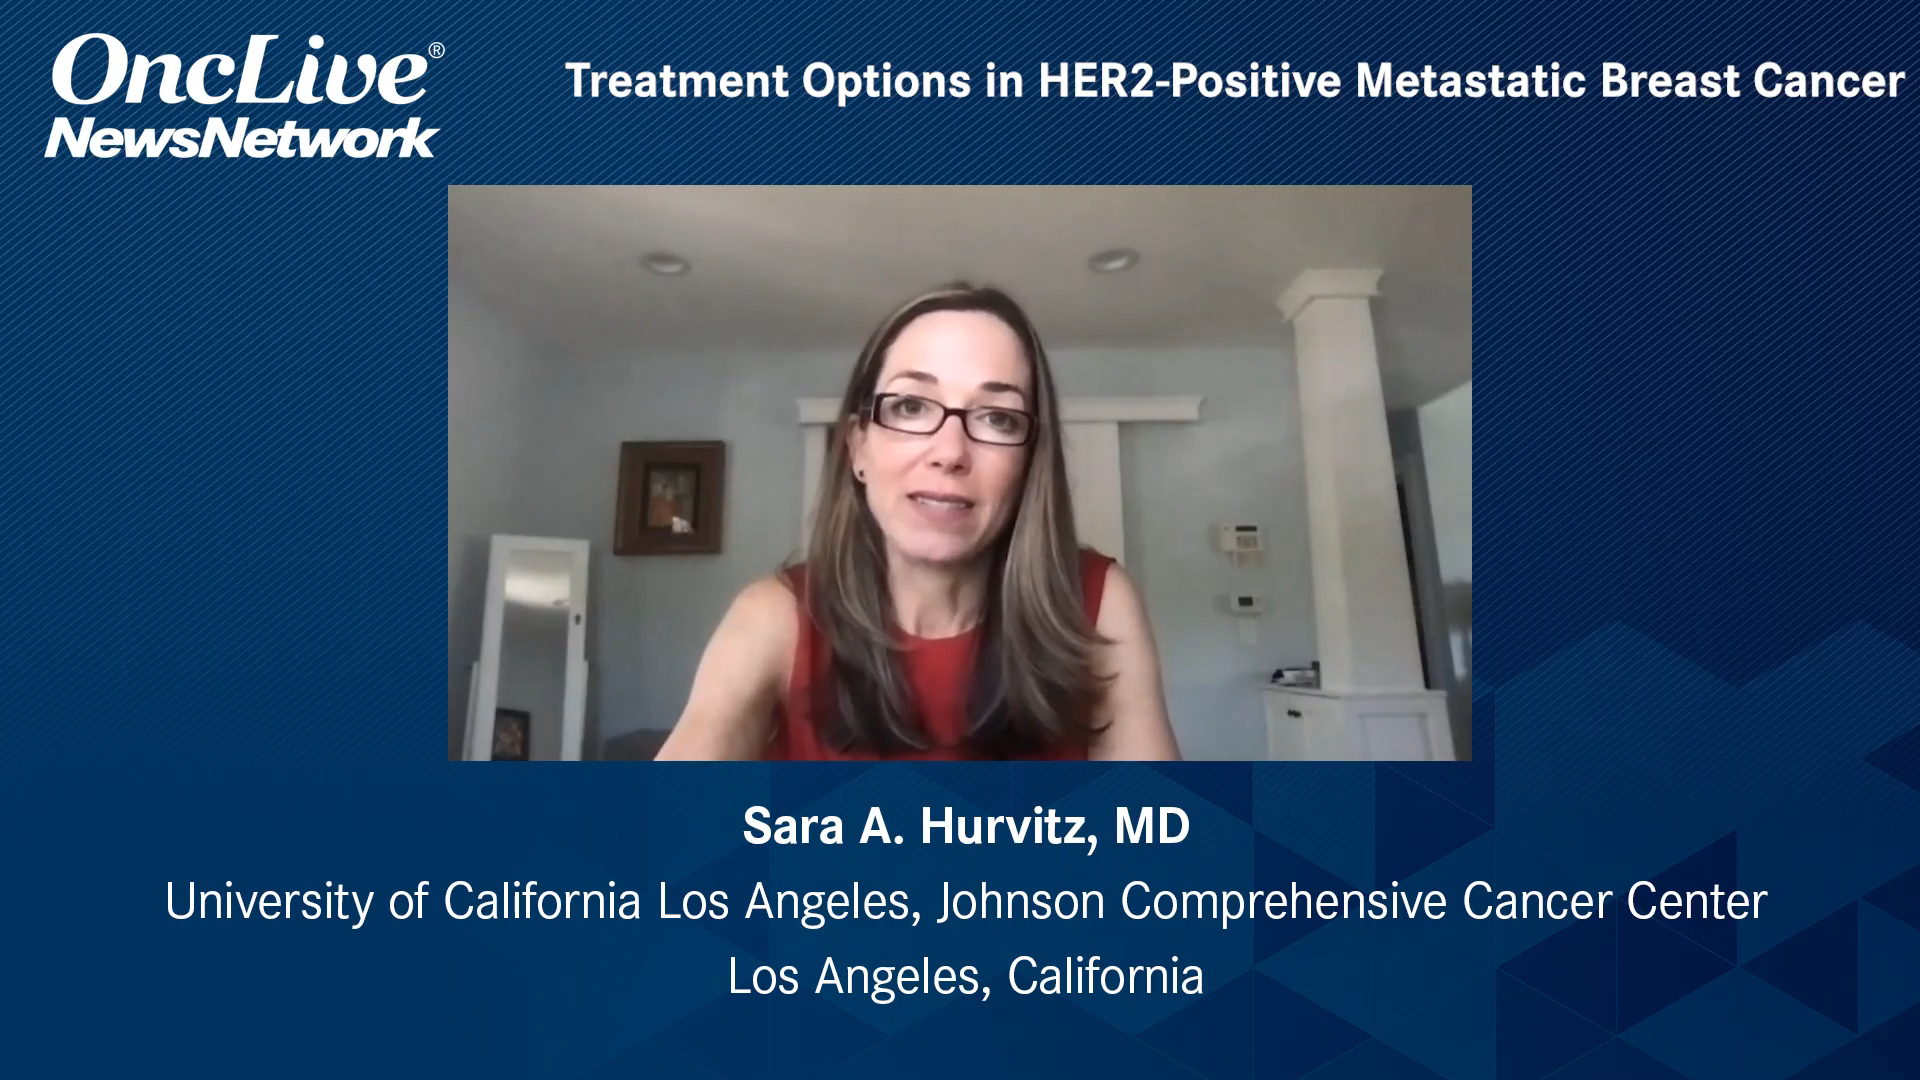 Treatment Options in HER2-Positive Metastatic Breast Cancer